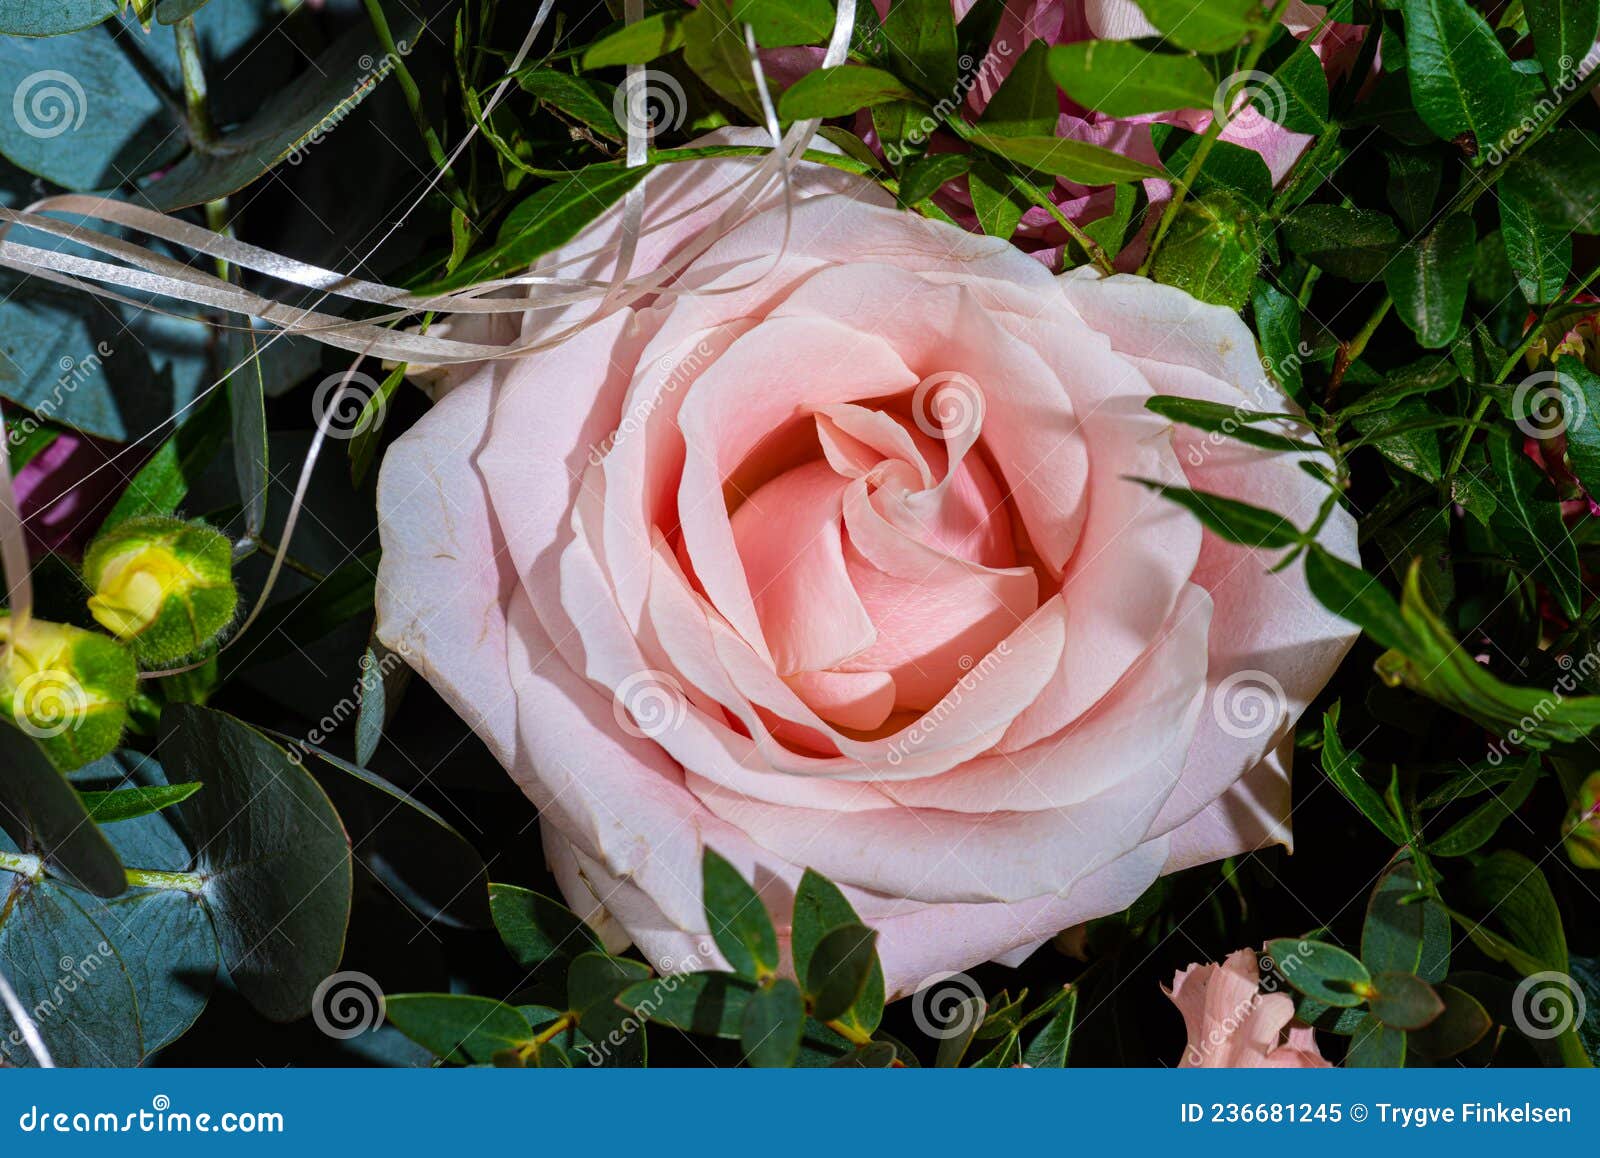 details of a pink rose bouquet..